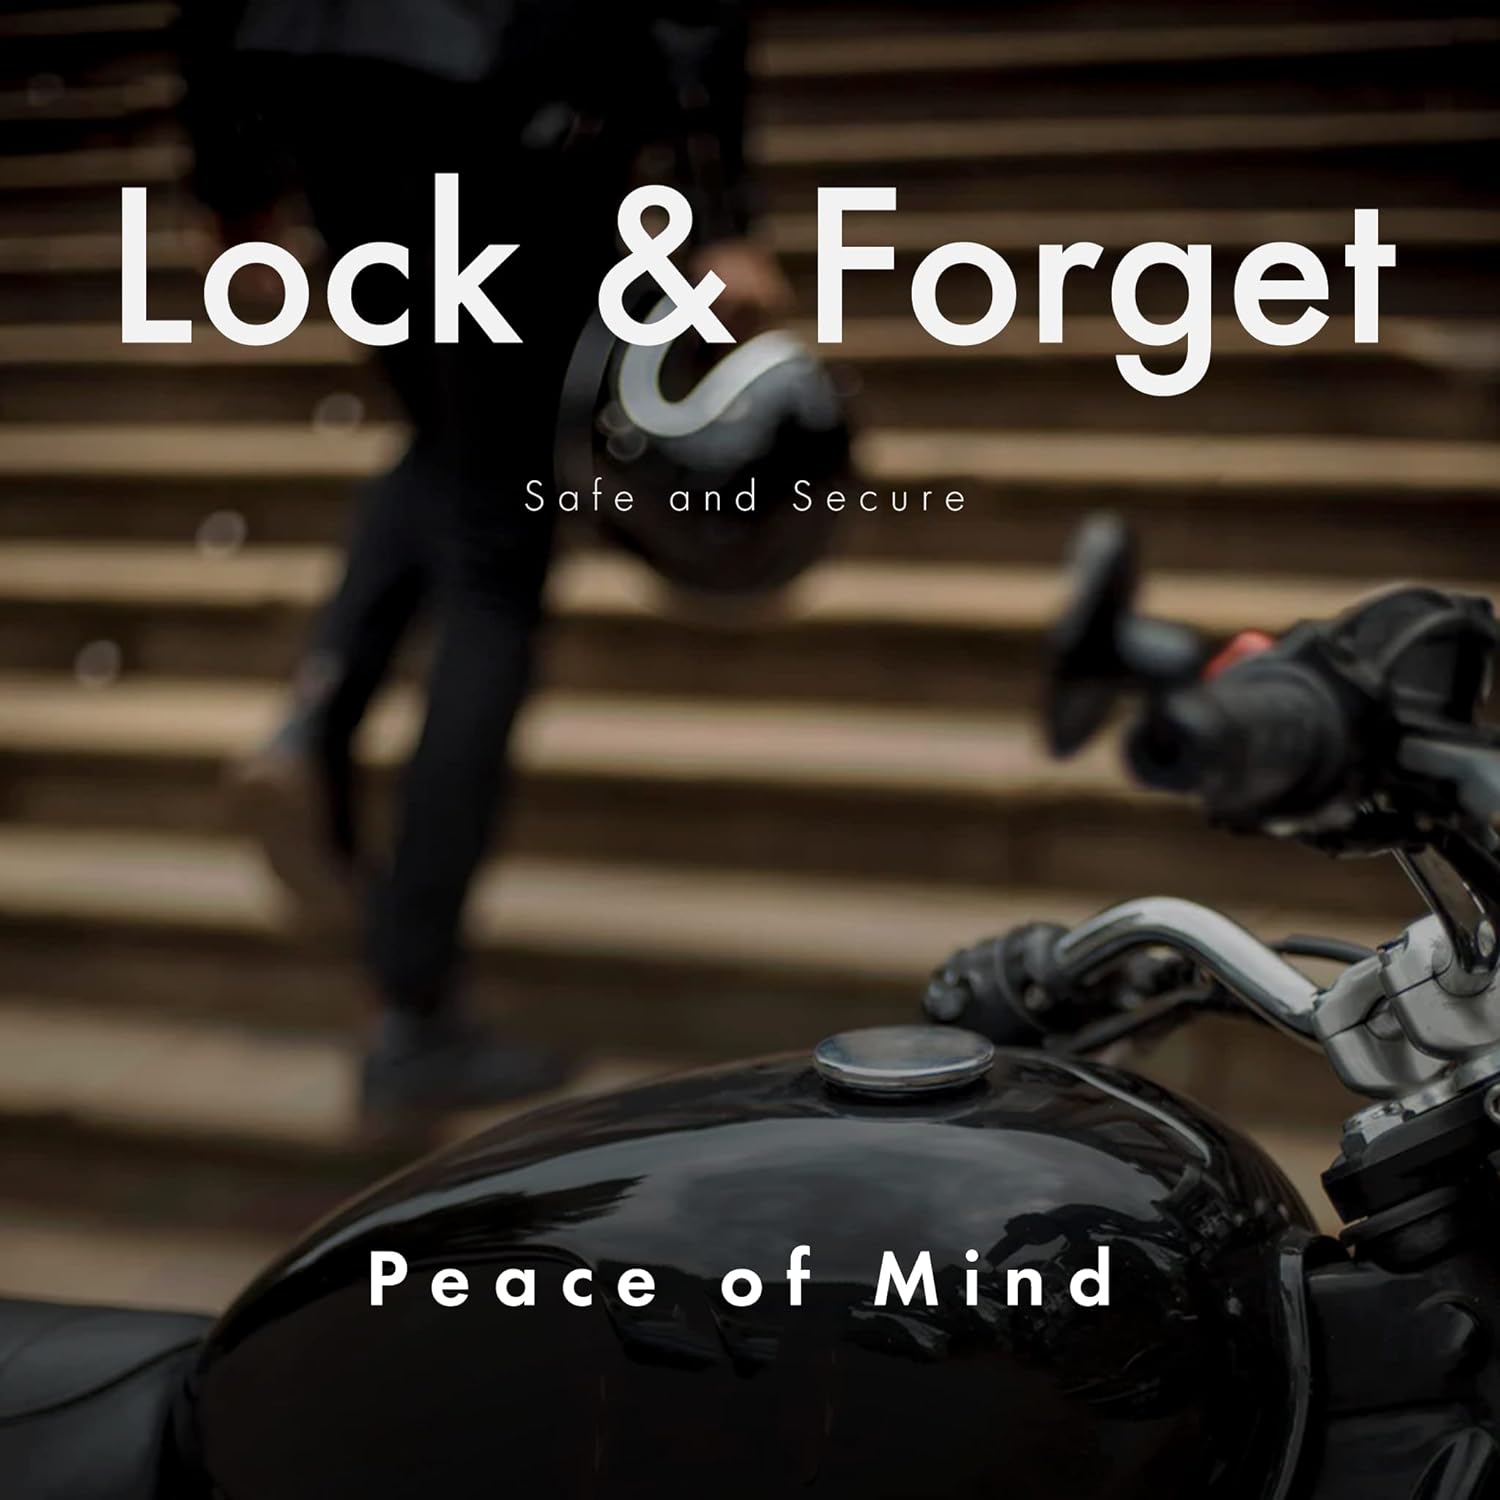 Advertisement with the phrase 'Lock & Forget' in large letters at the top and 'Peace of Mind' at the bottom, featuring a blurred image of a person walking up stairs and a close-up of a motorcycle tank in the foreground